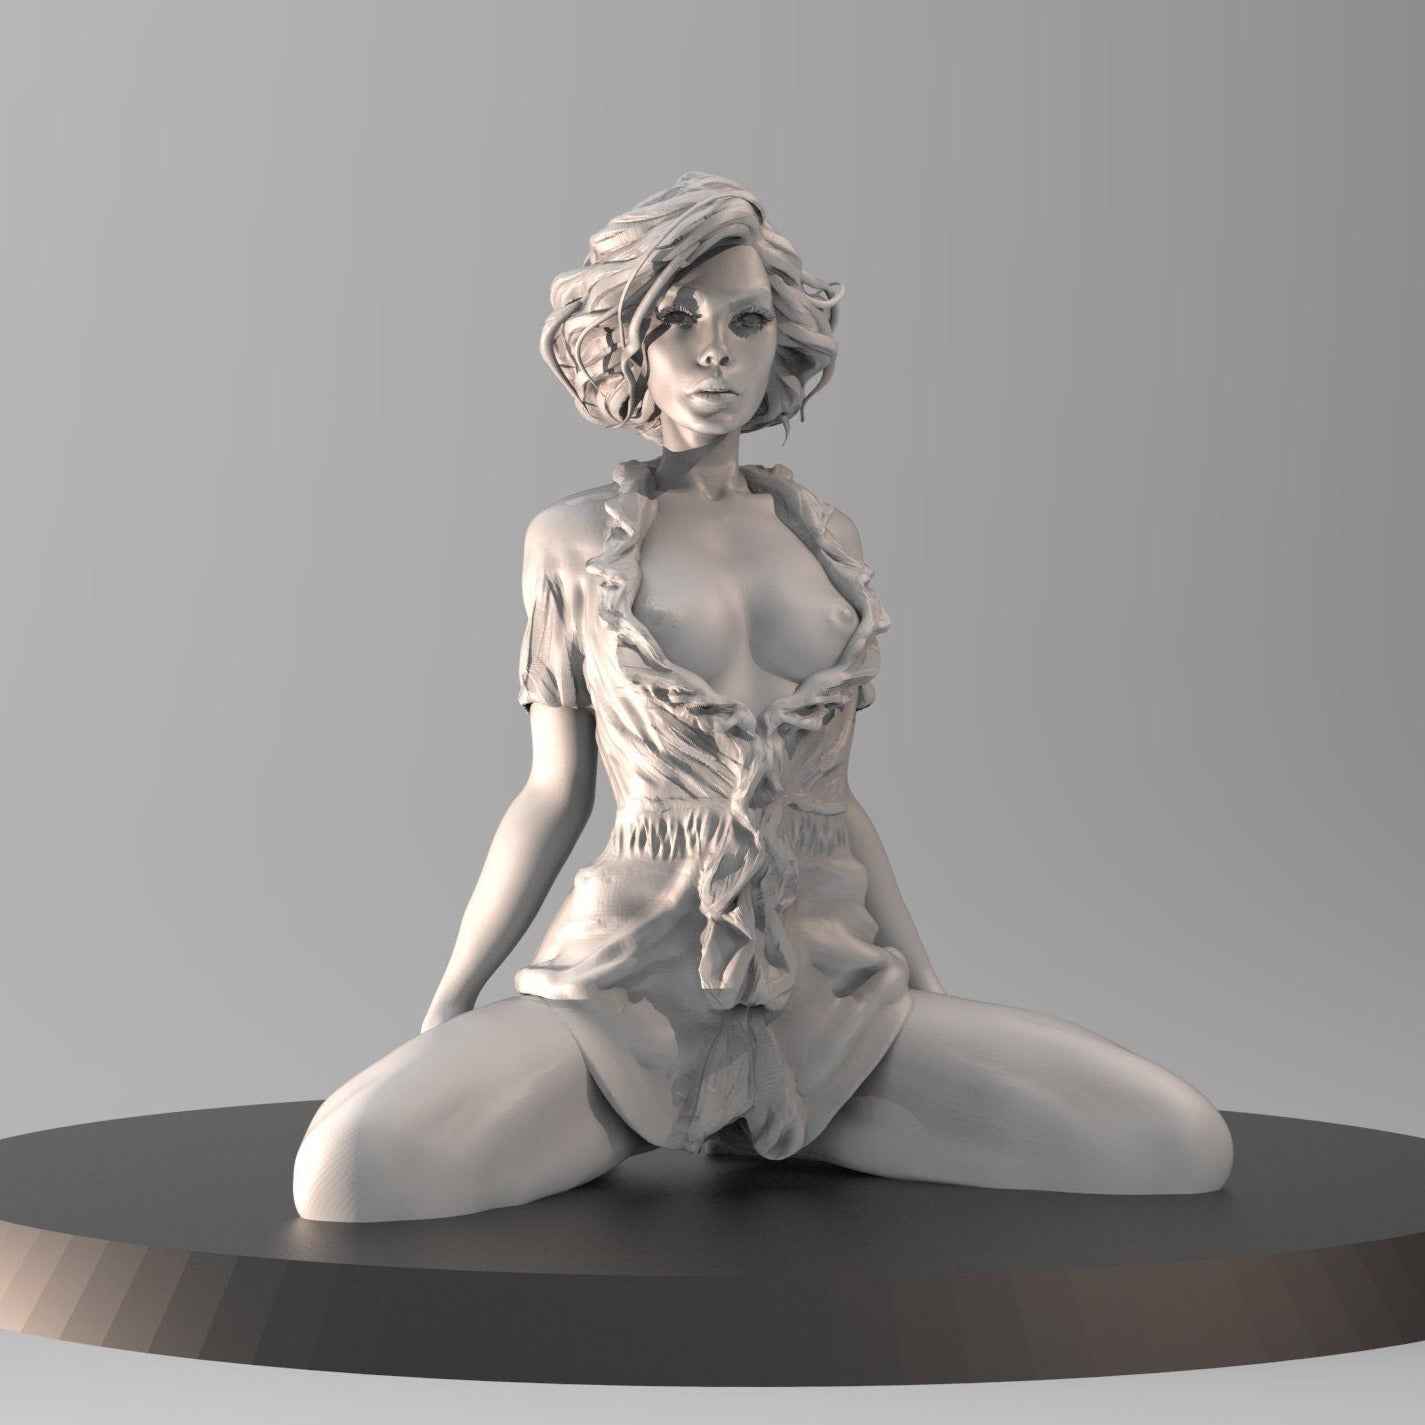 Pinup Girl Vol.1 SUZY | 35mm / 75mm | 3D Printed | Unpainted | Sexy | Pin|up | NSFW Version | Figurine | Figure | Miniature | Sexy |